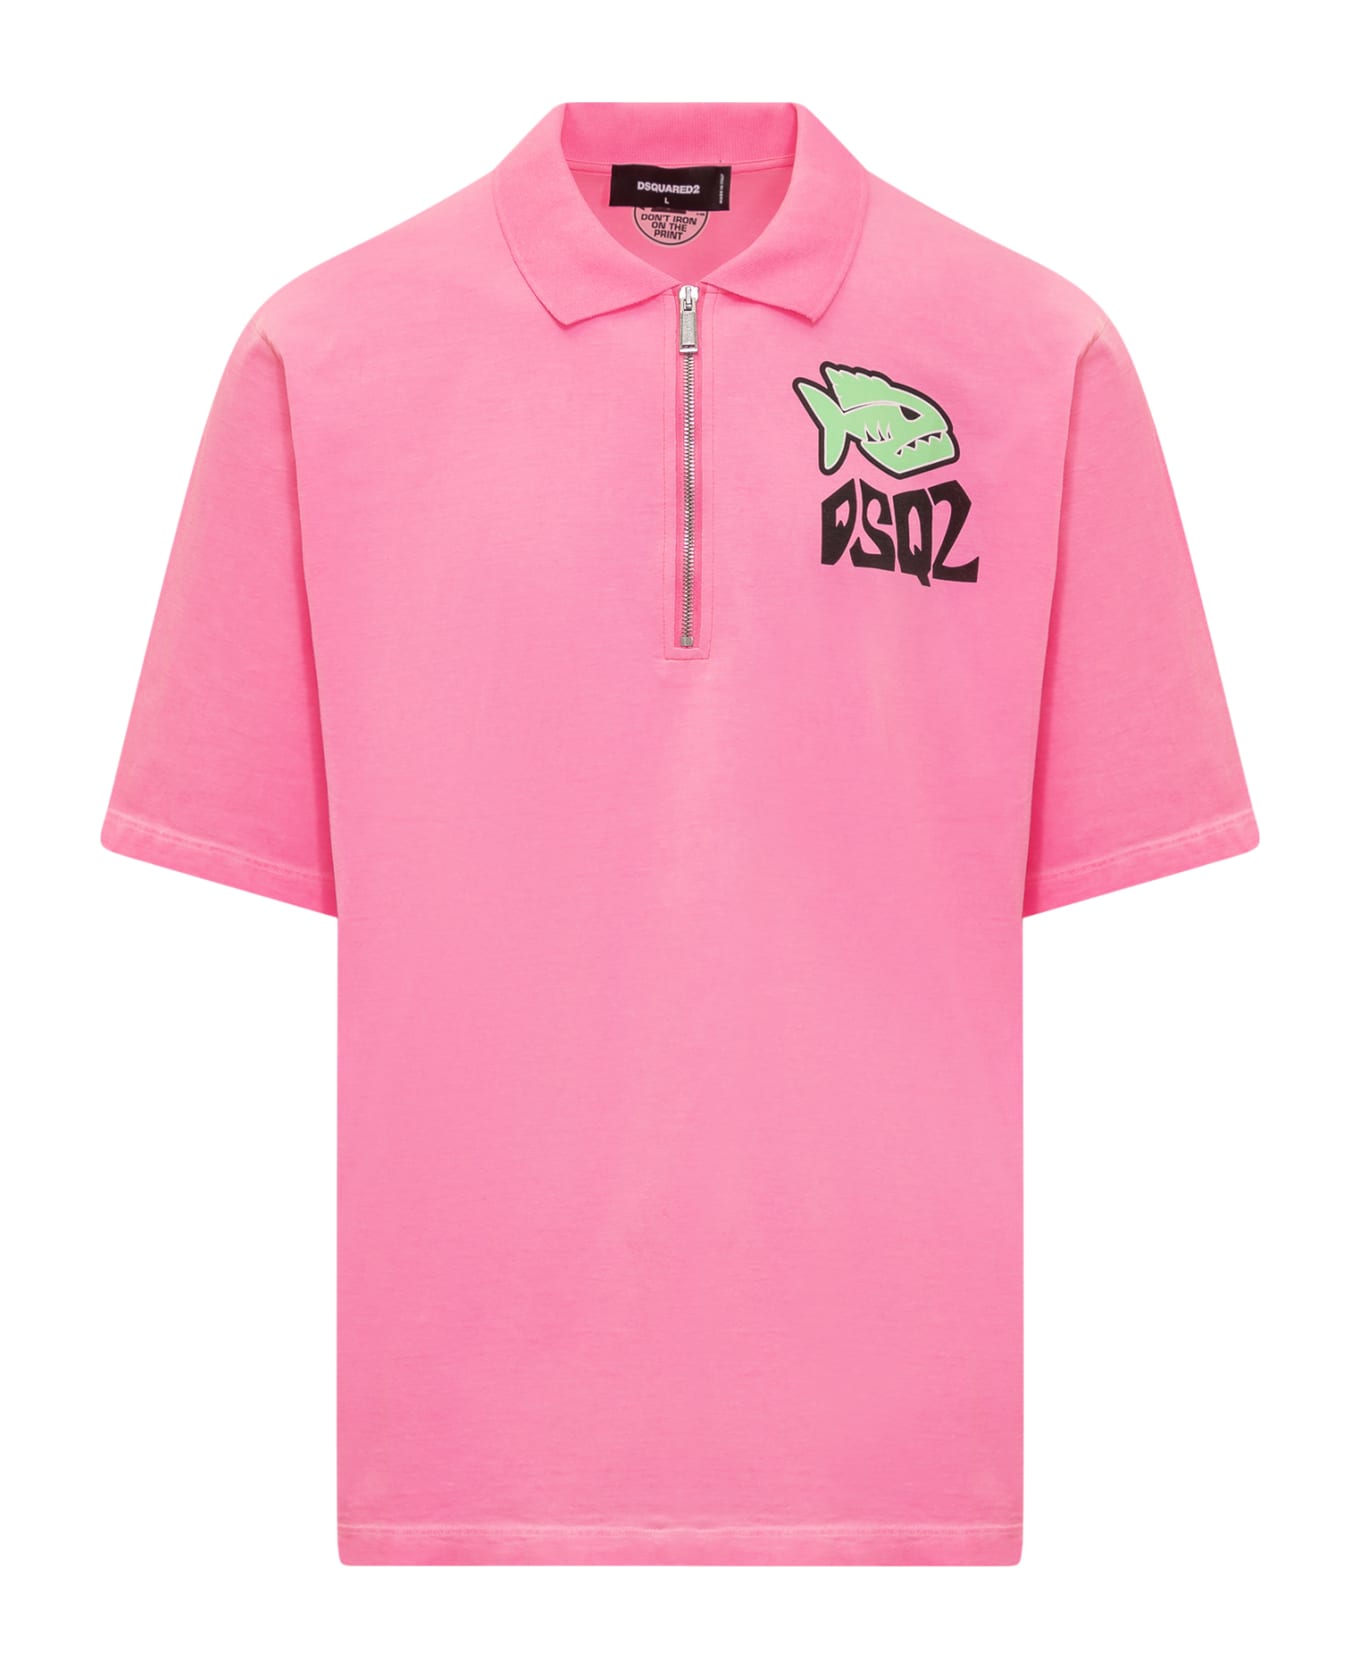 Dsquared2 Fish Skater Polo - PINK FLUO ポロシャツ